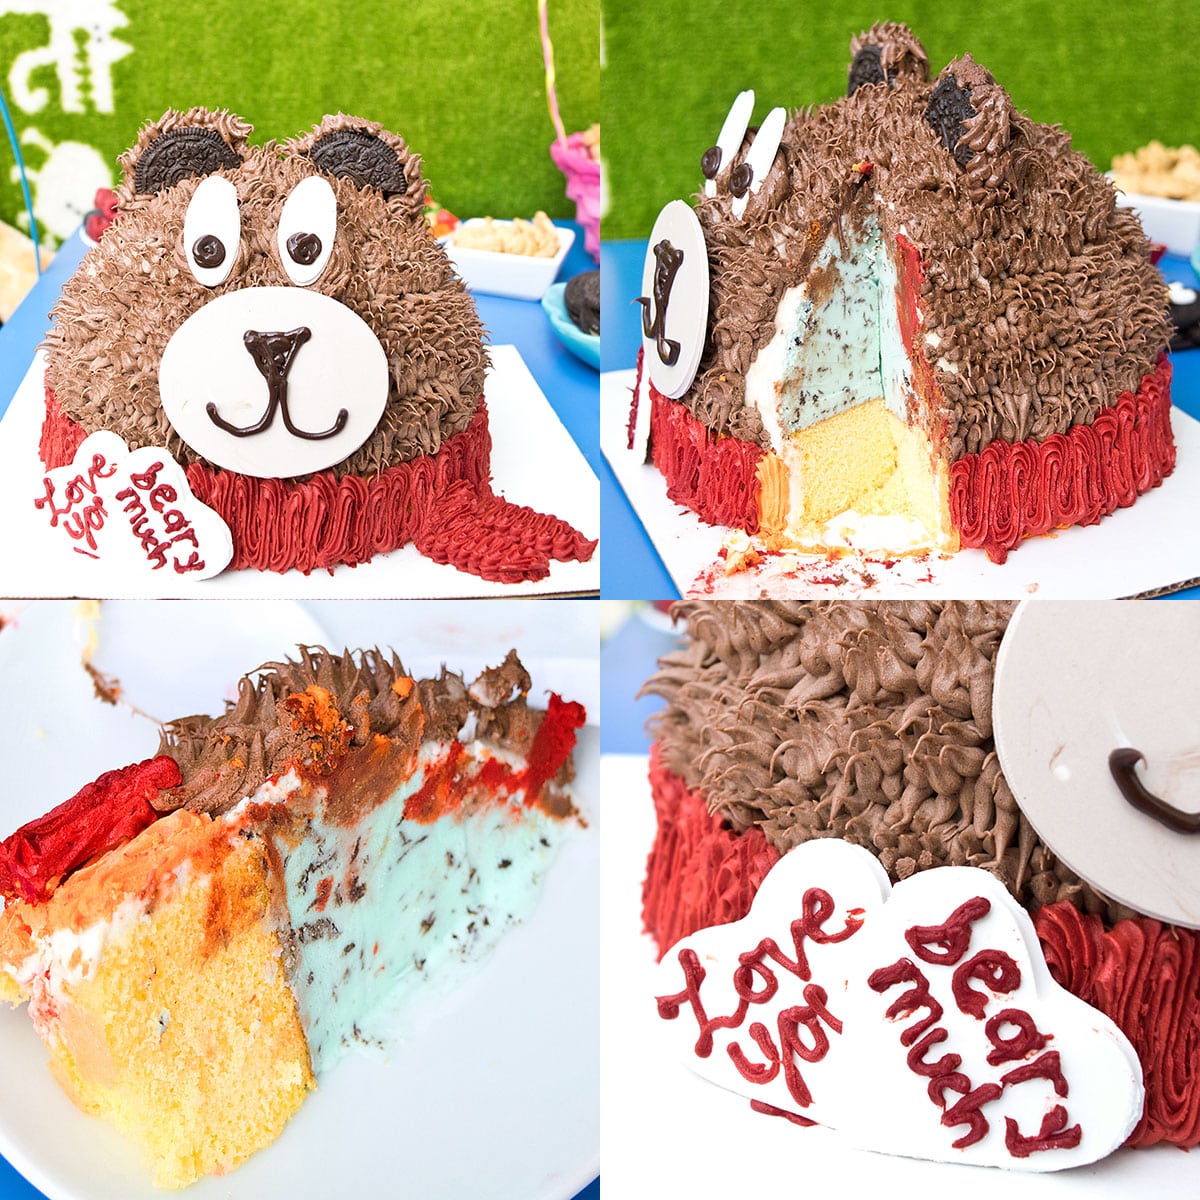 Collage Image With Teddy Cake From Baskin Robbins. 